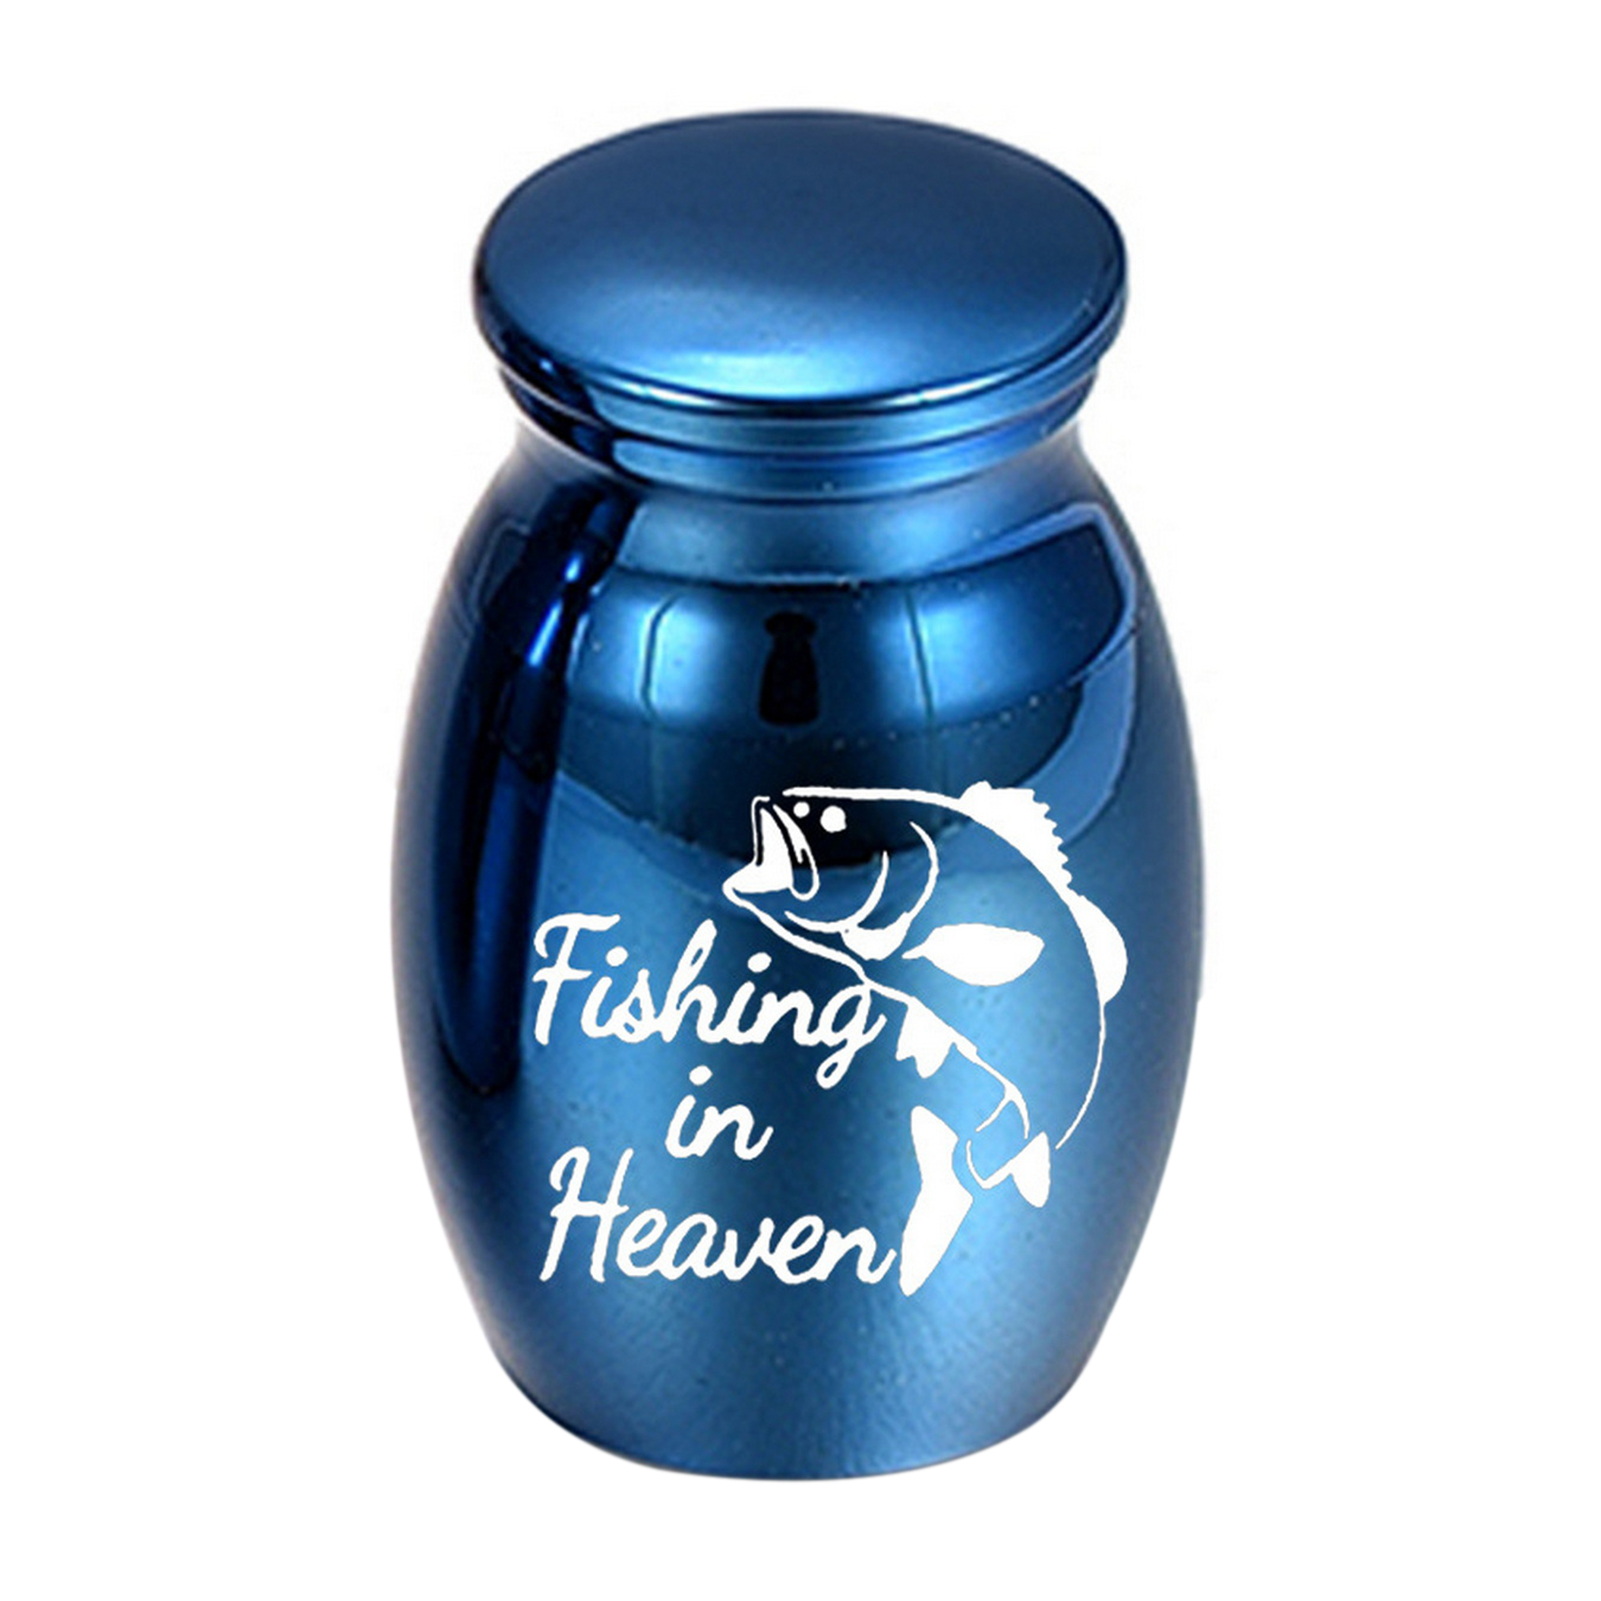 Pocket-sized Pet Urn Portable Pet Urn Heavenly Fishing Pet Urn Small Metal  Cremation Box for Dog/cat Ashes Beautiful Memorial Keepsake with Printed  Thread Lid Ideal